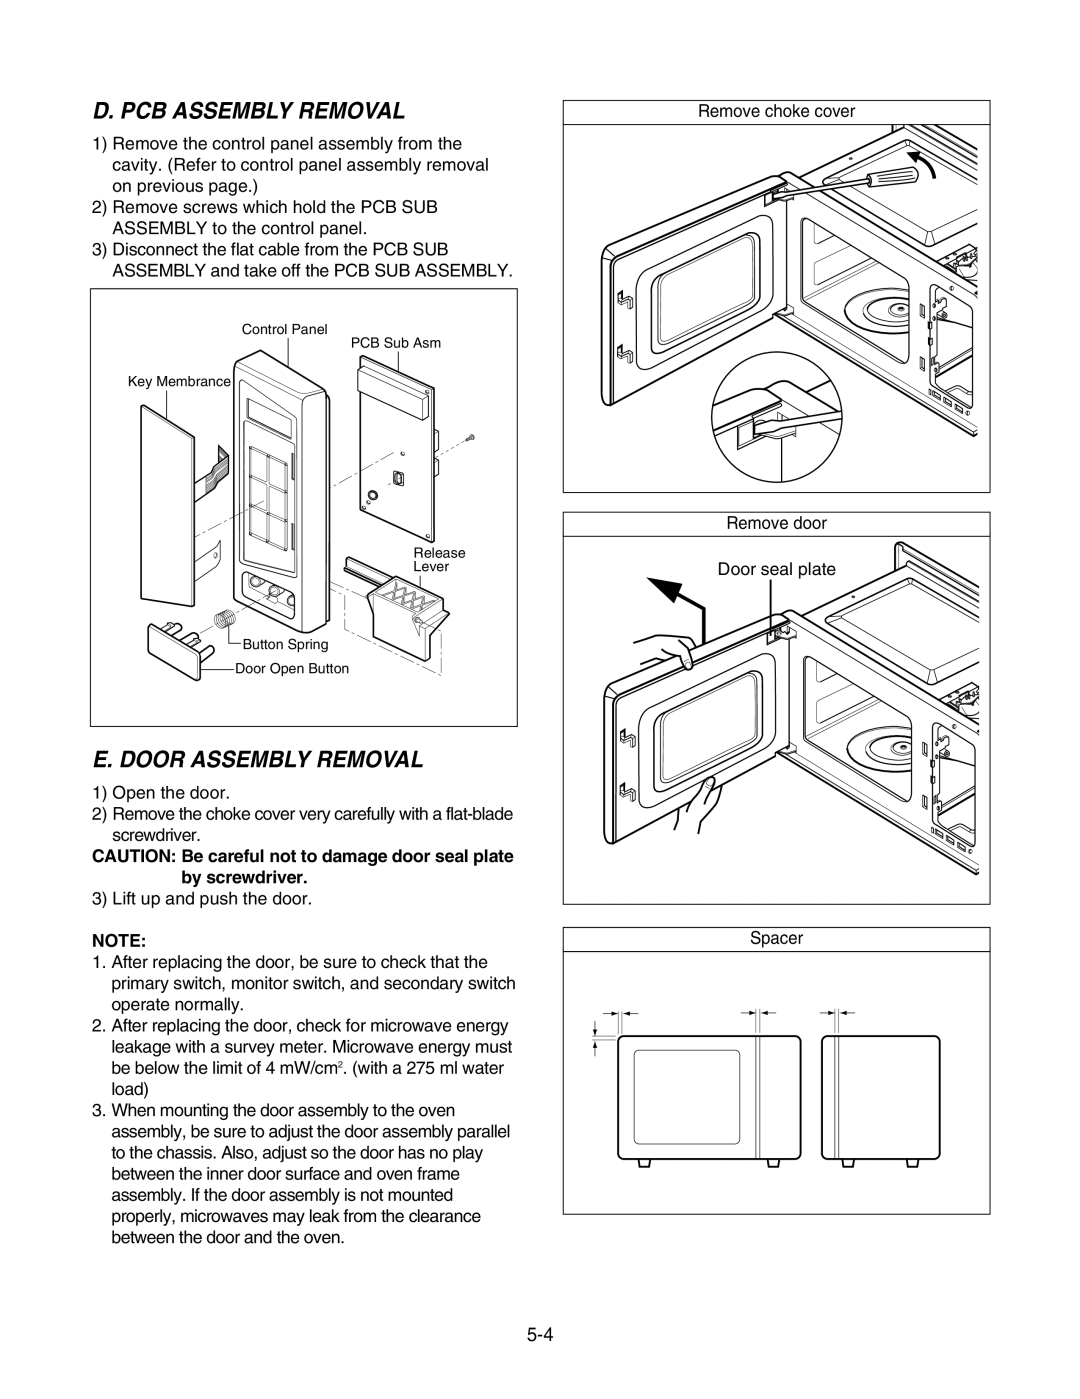 GE LMAB1240ST service manual D. Pcb Assembly Removal, E. Door Assembly Removal 